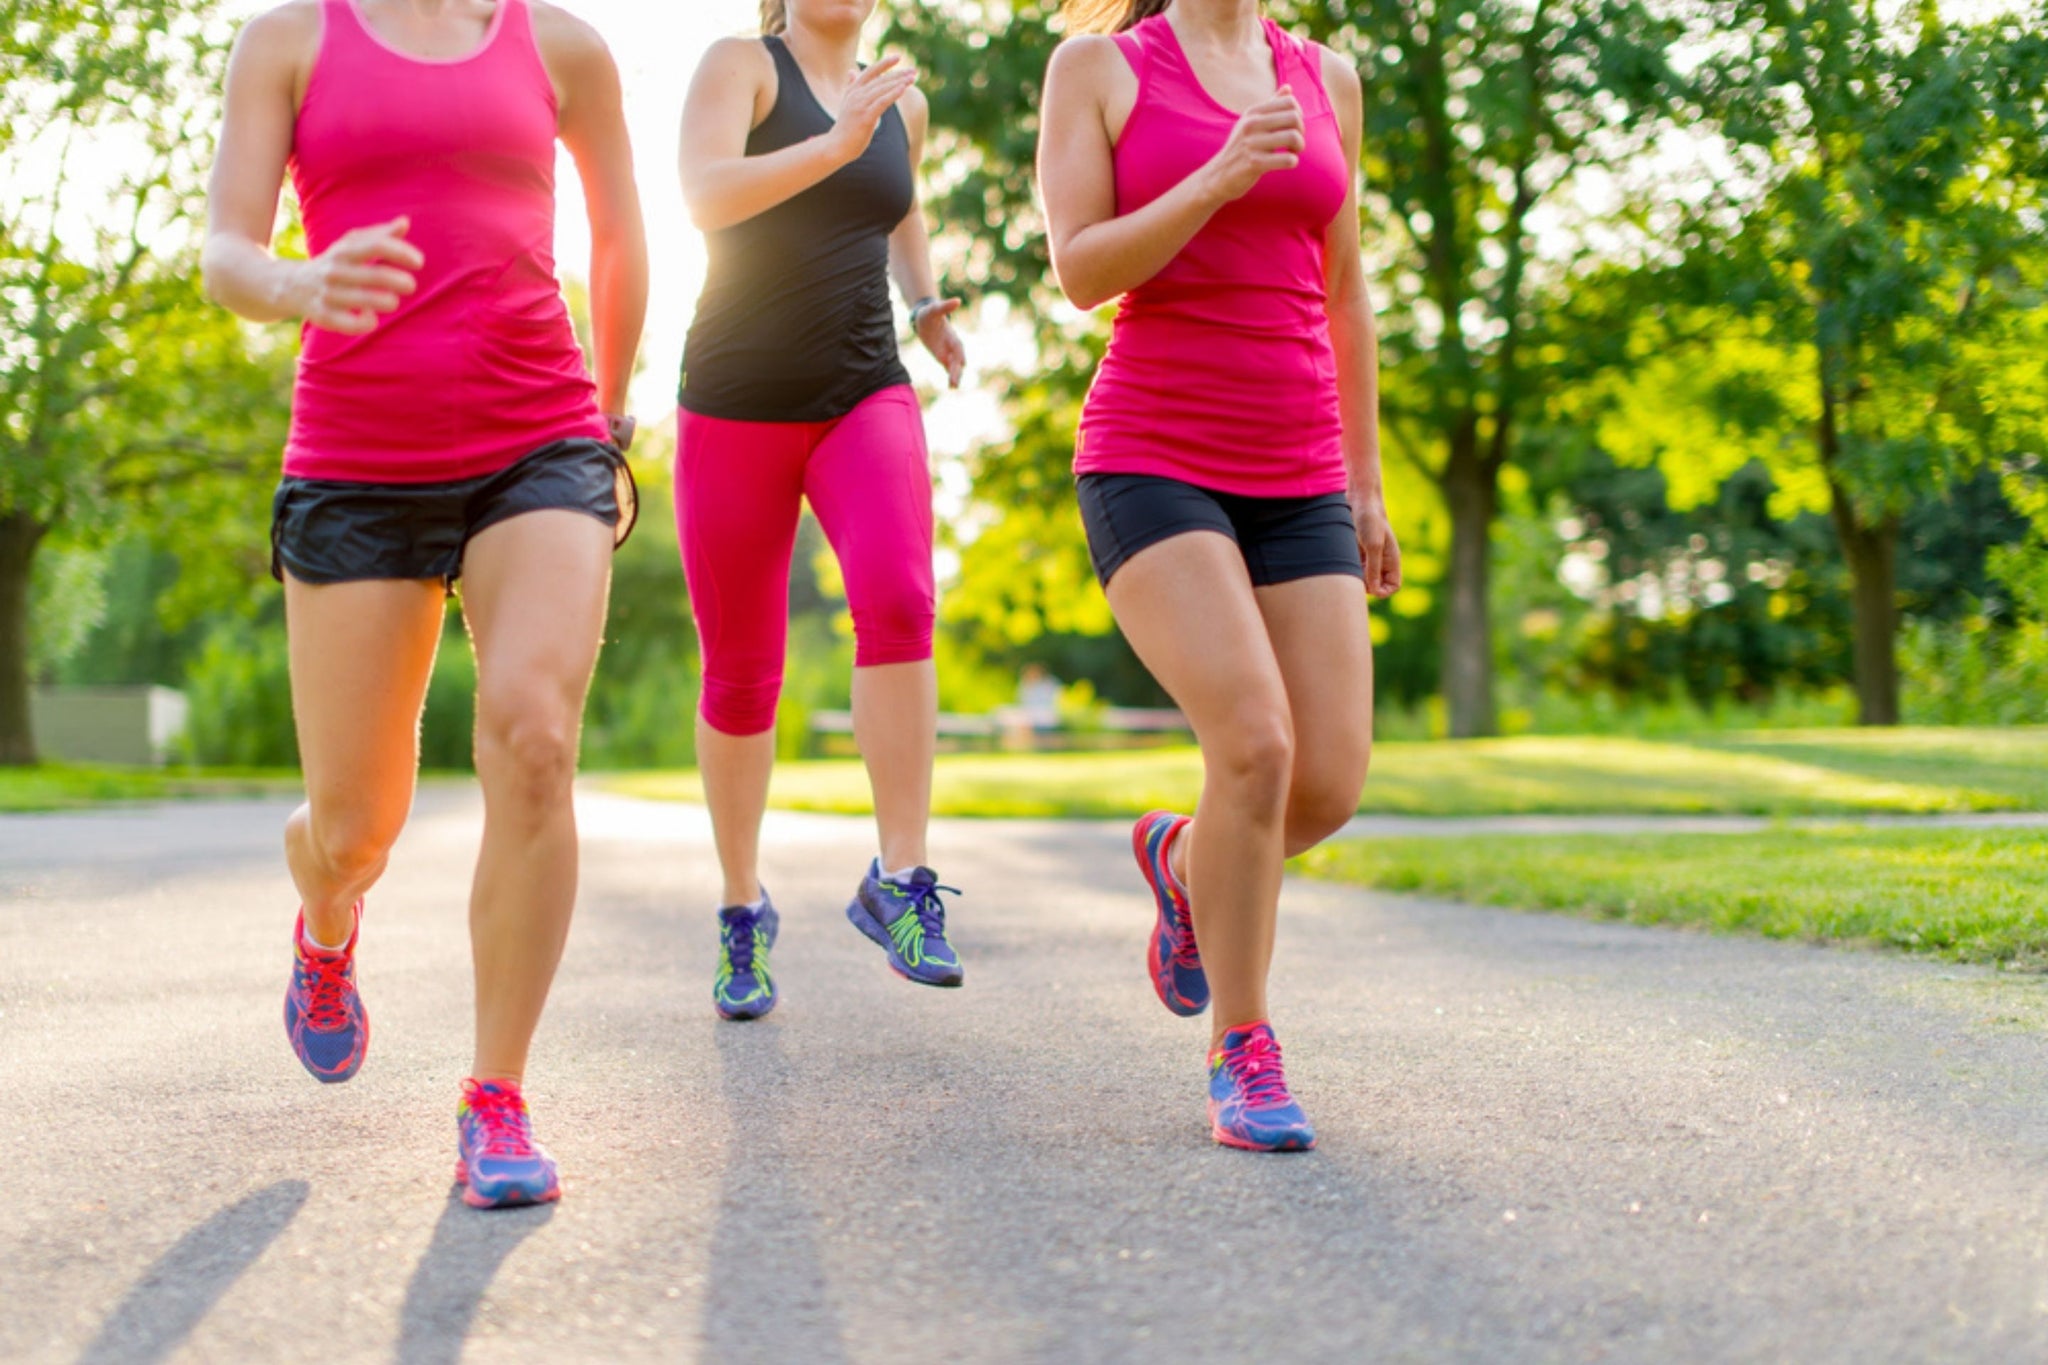 How to Minimise the Risk of Injury From Running